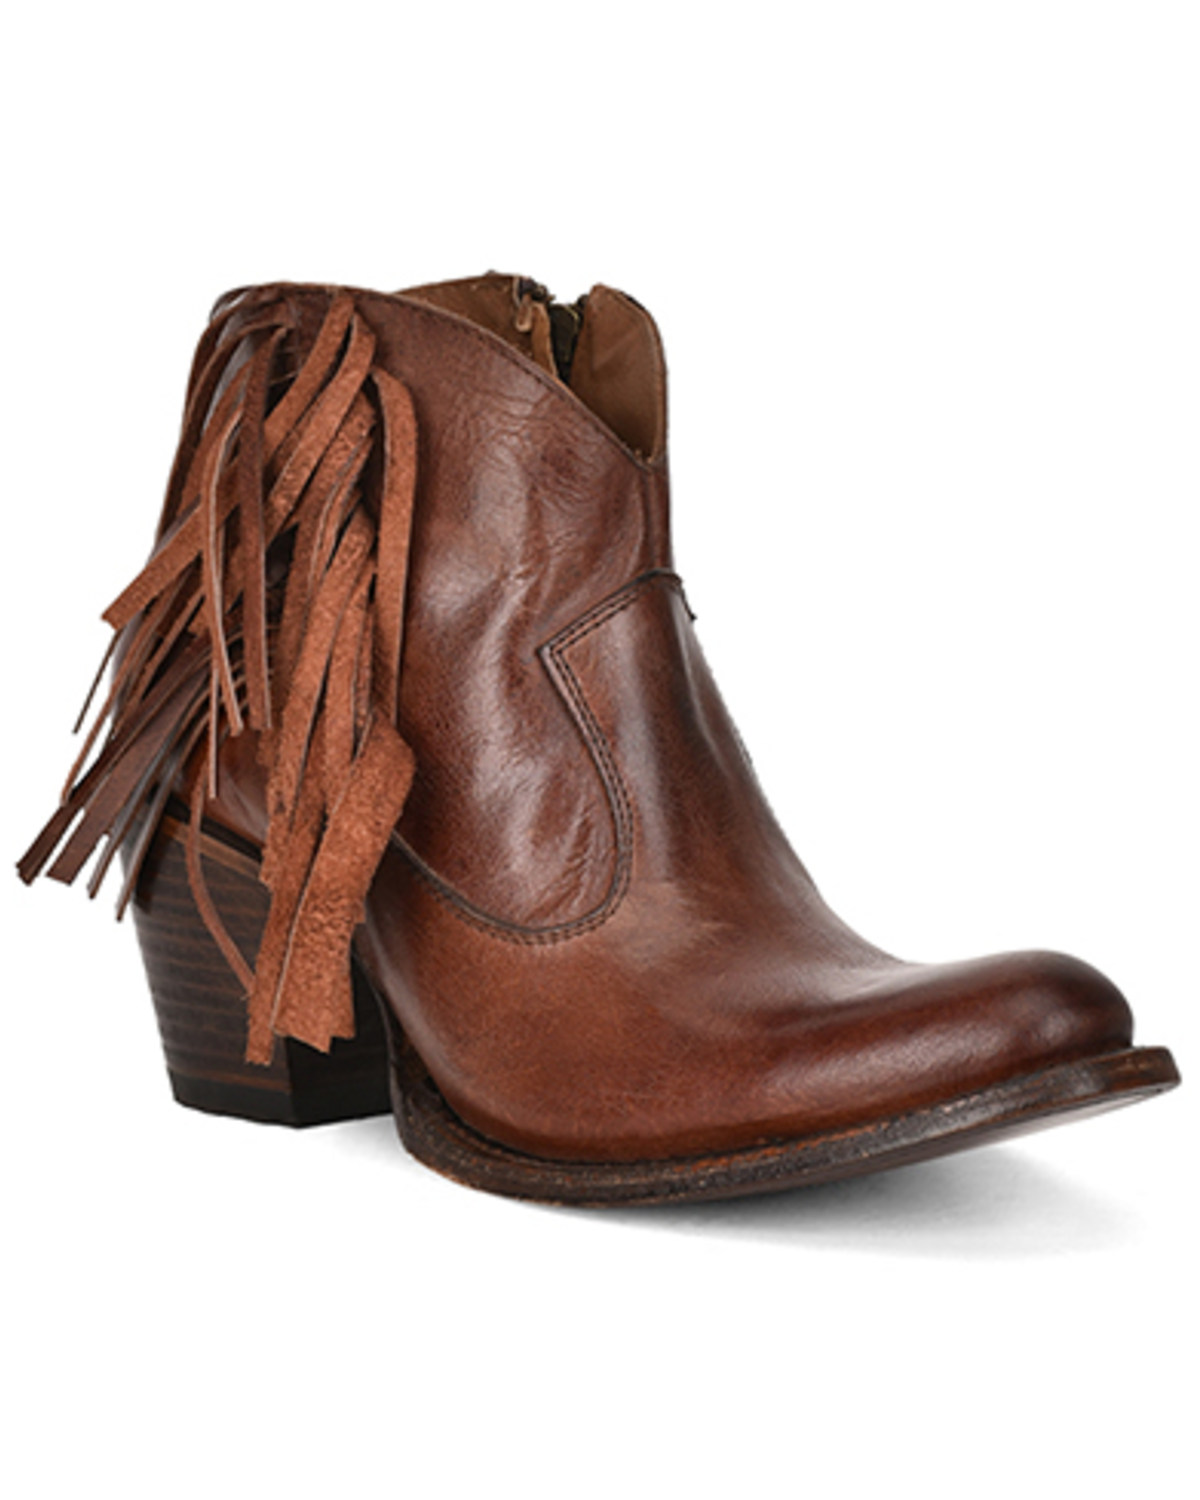 Corral Women's Fringe Ankle Boots - Round Toe